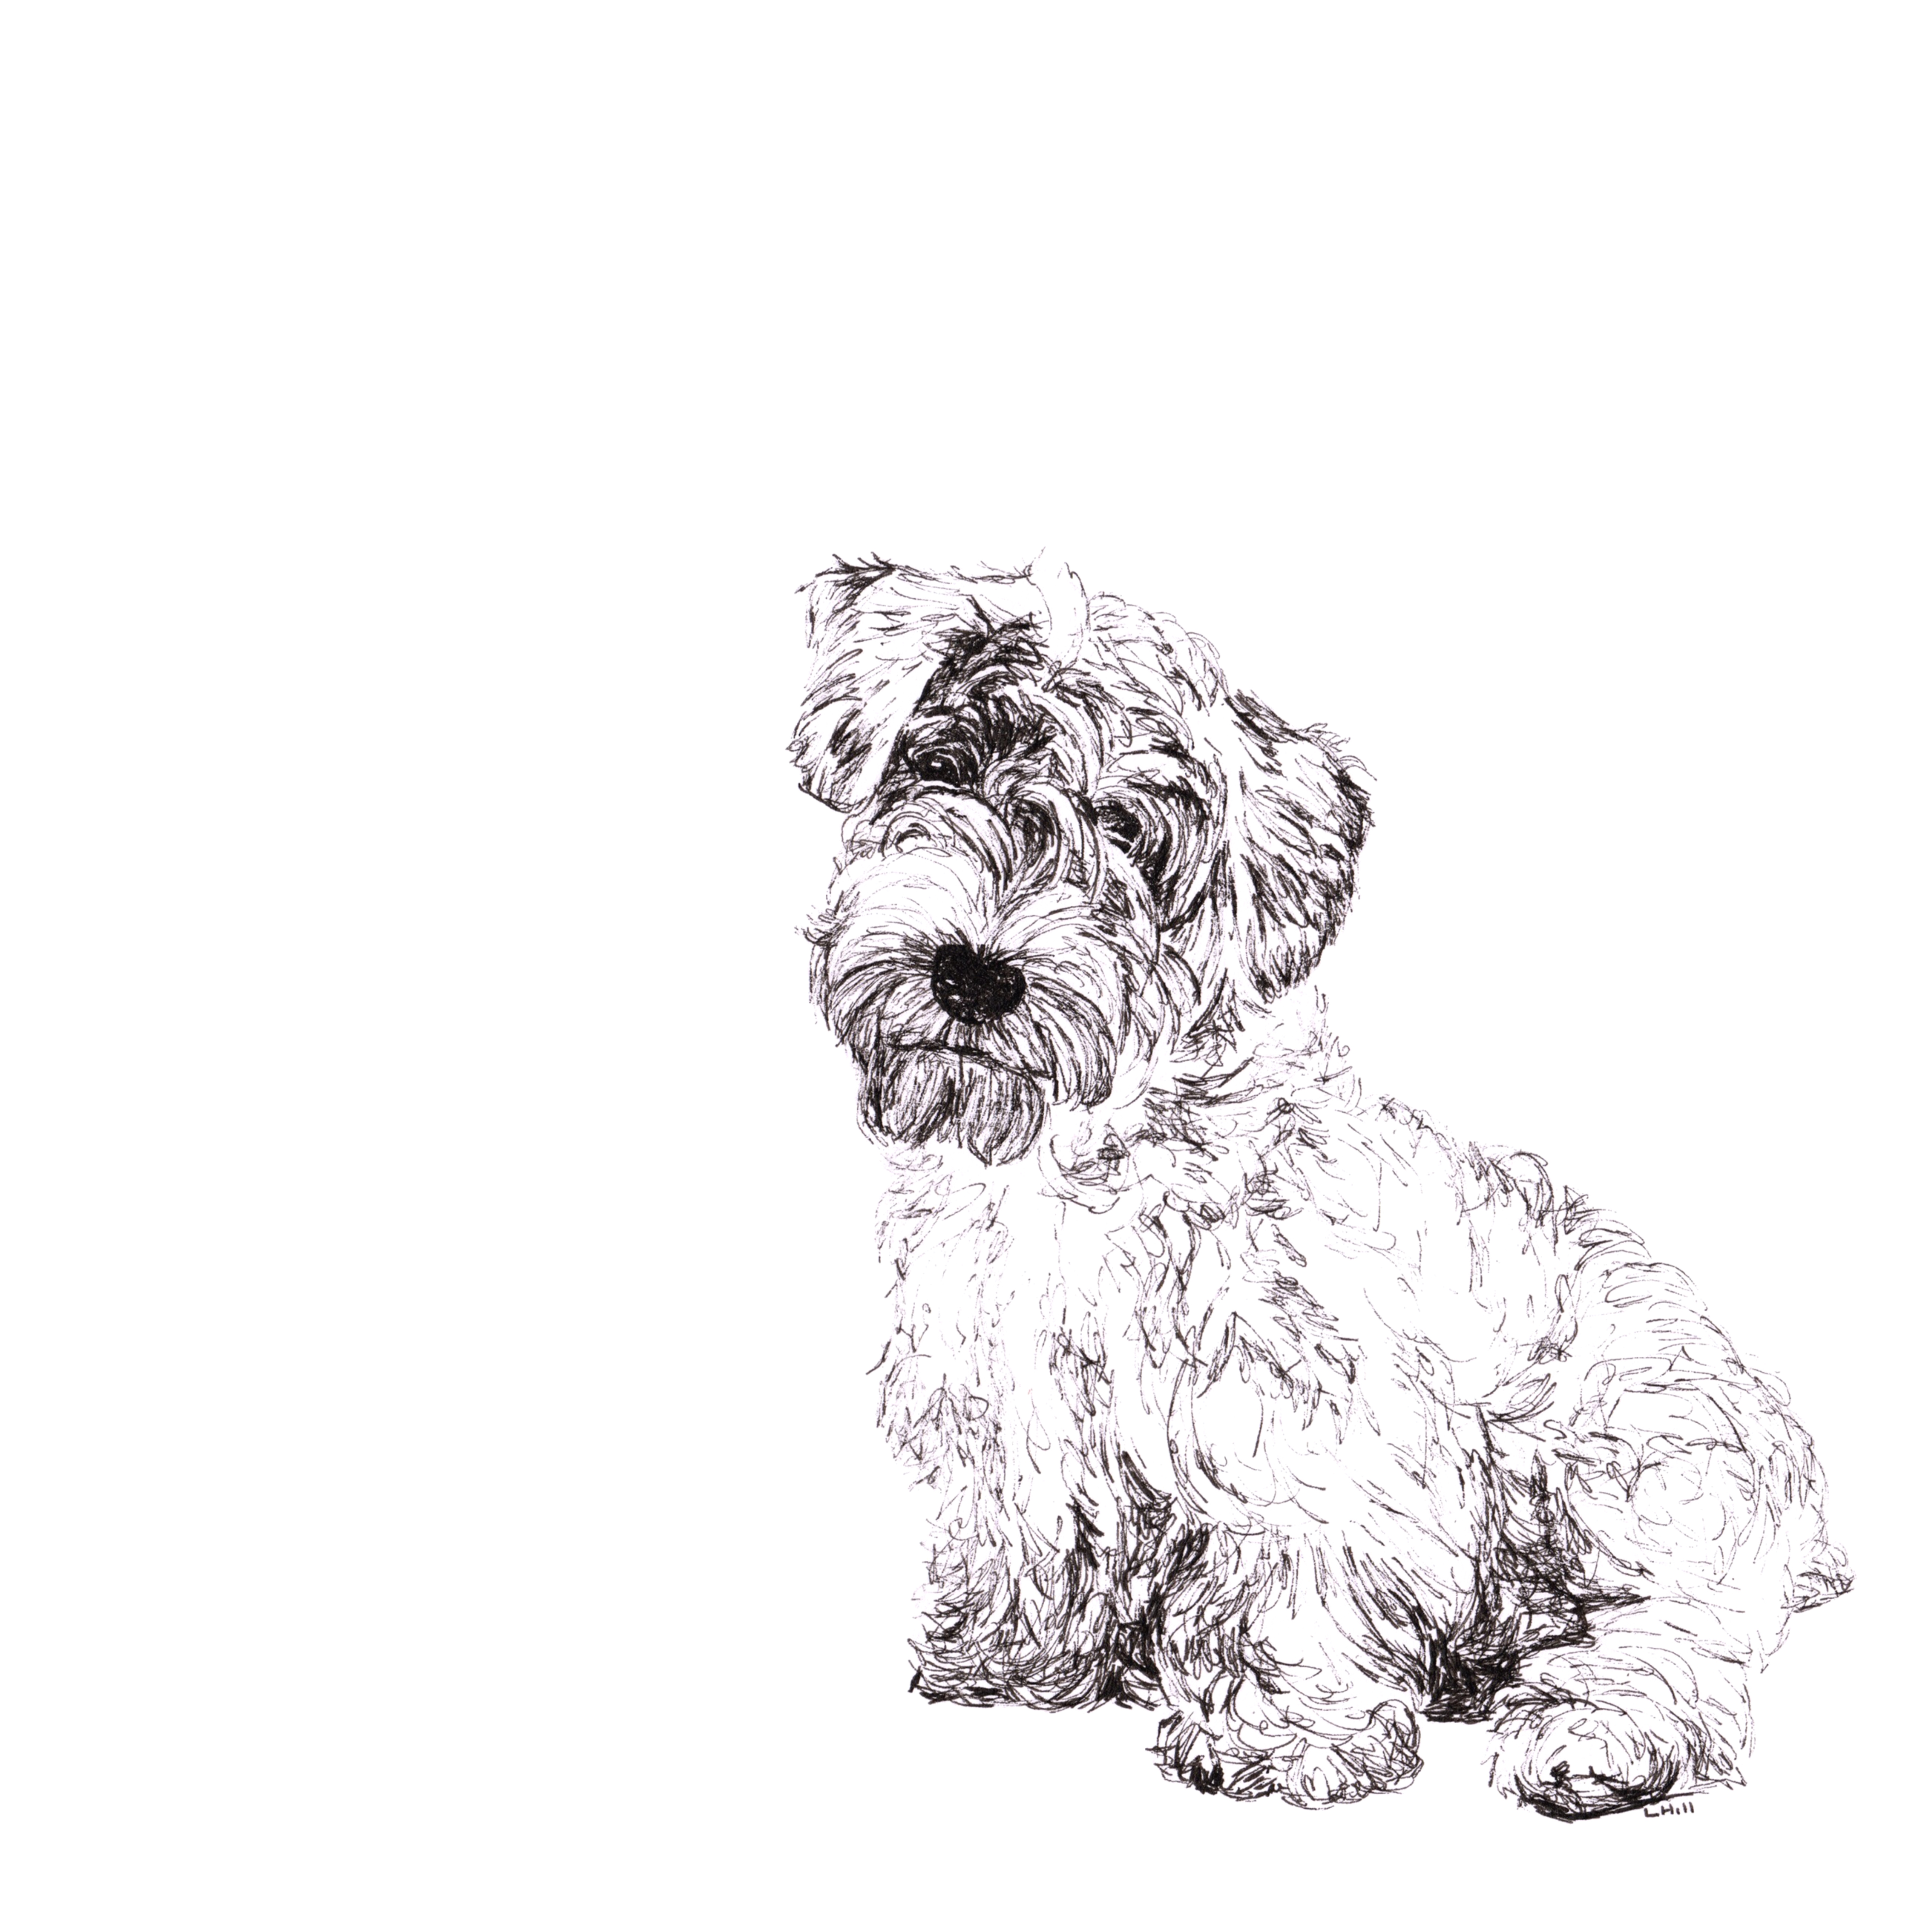 Sealyham Terrier pen and ink illustration by Louisa Hill